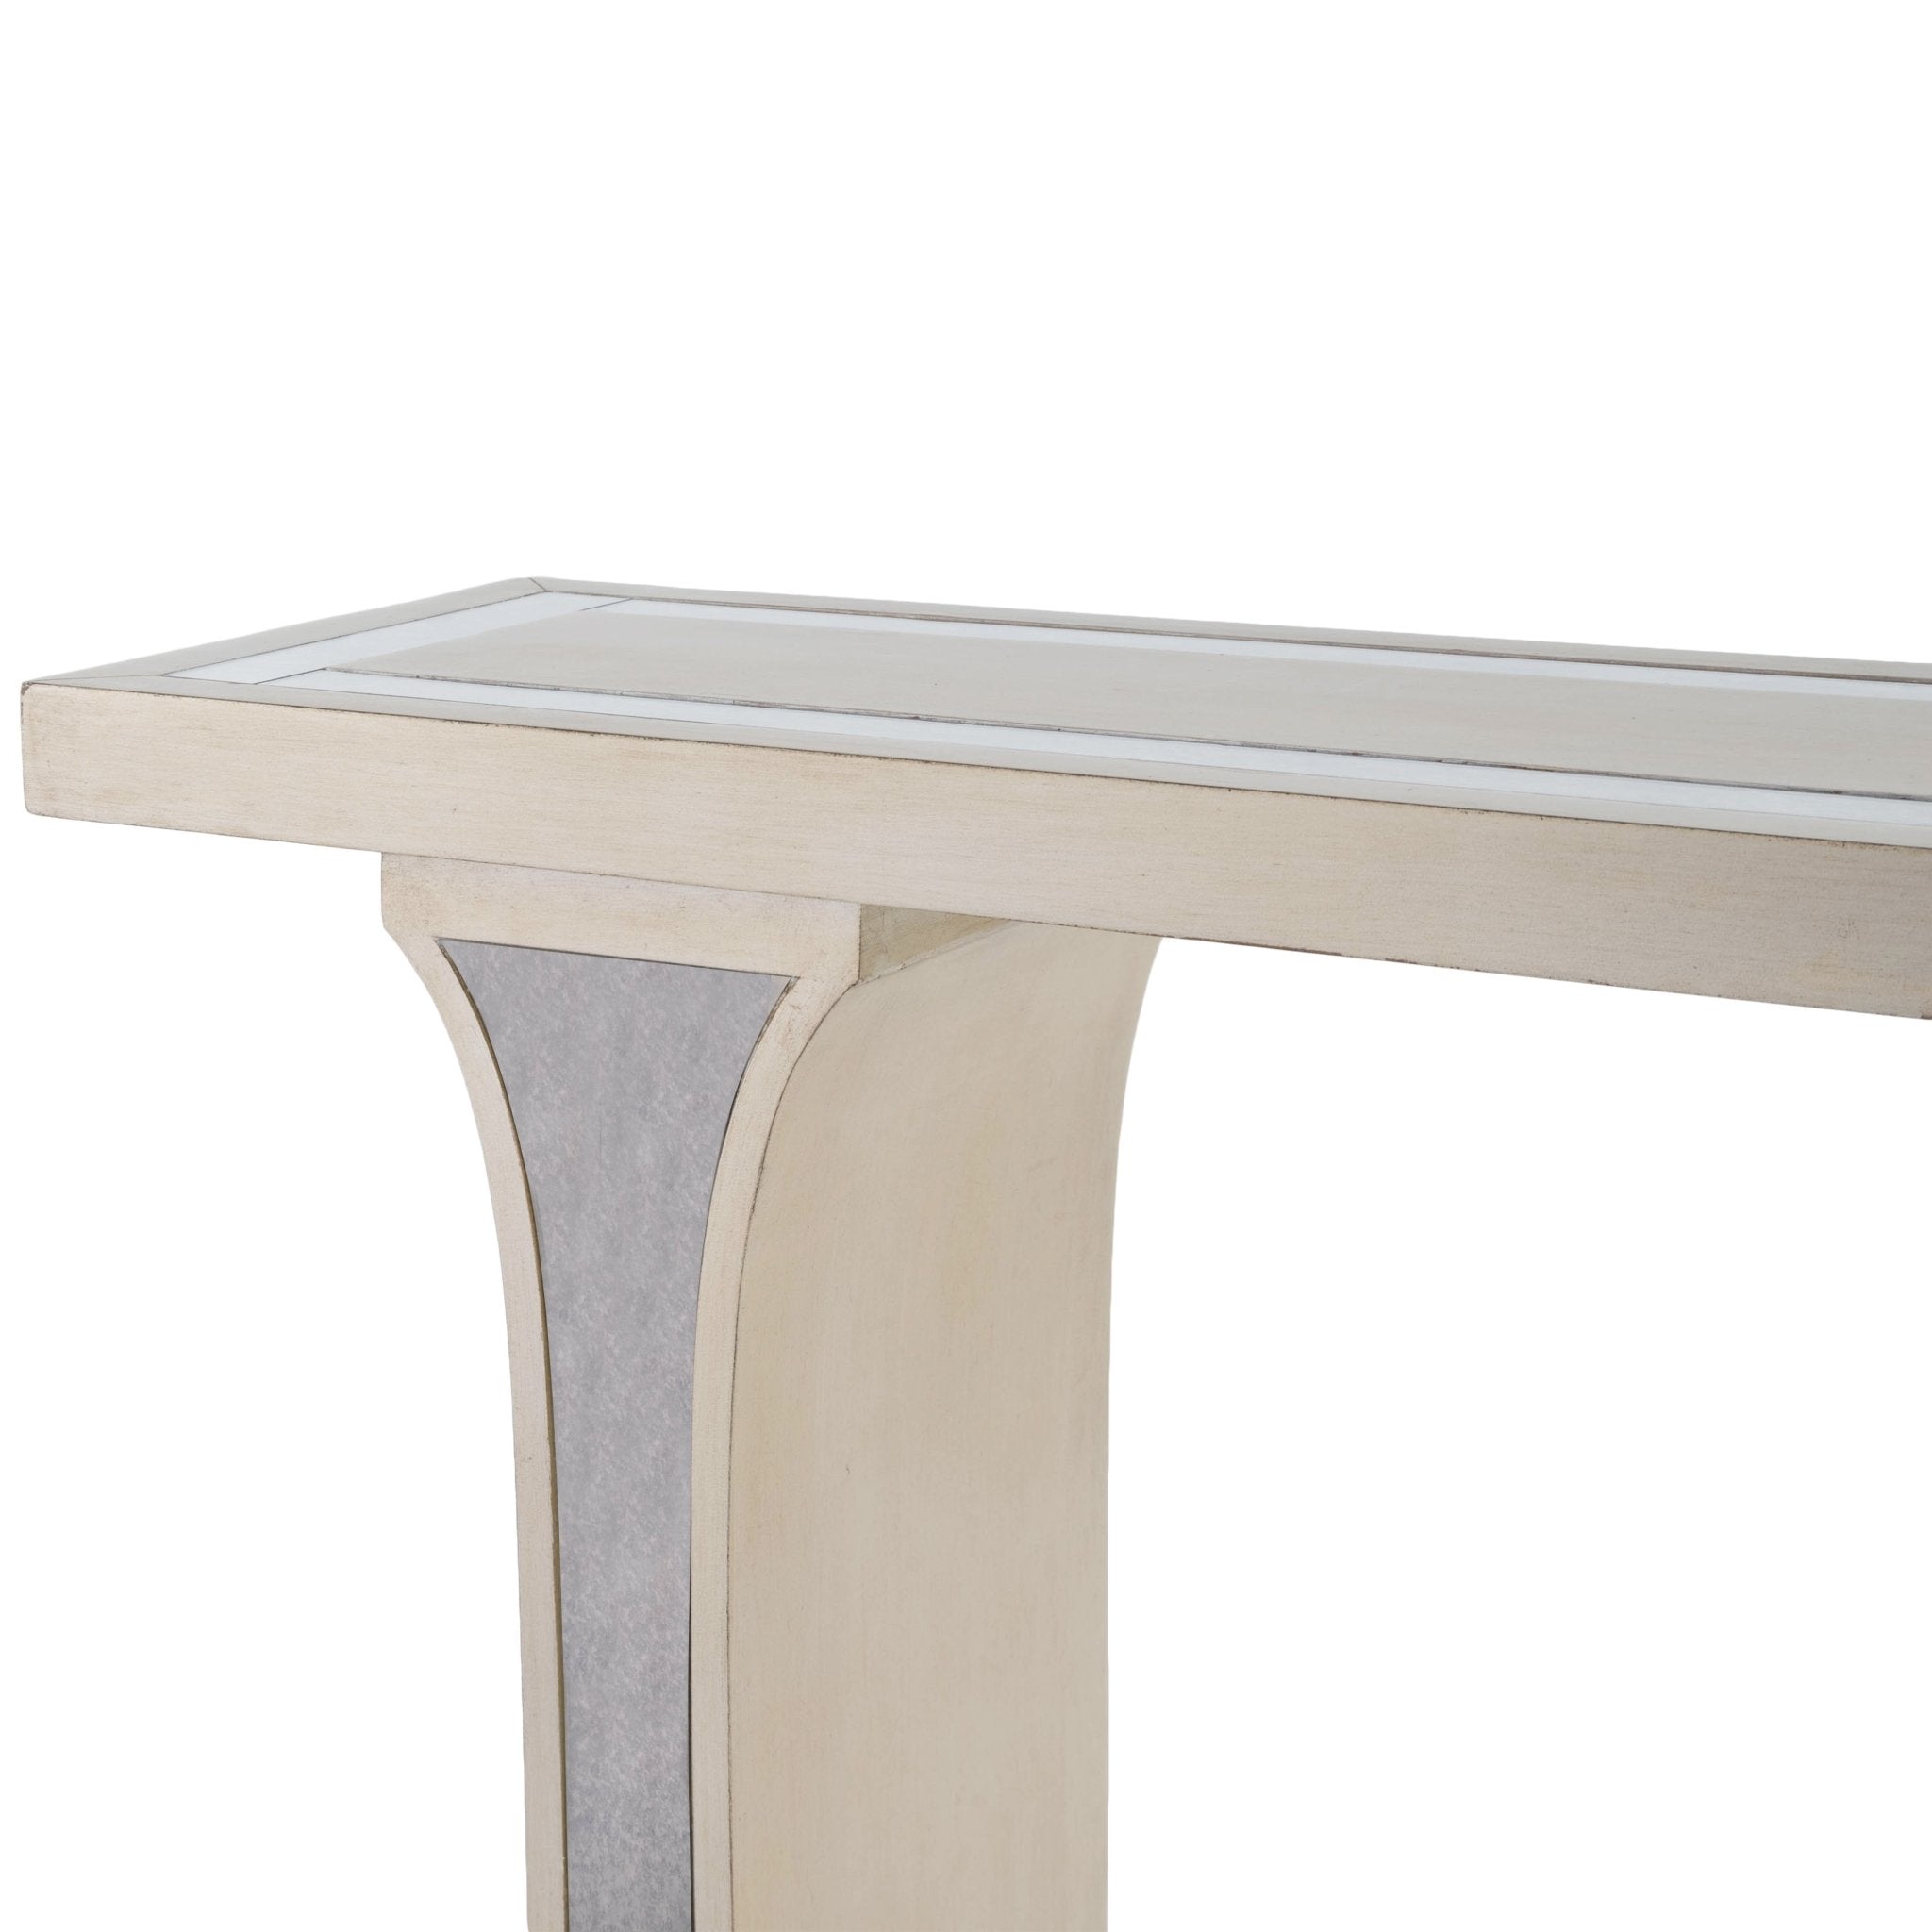 Katya Silver & Mirrored Console Table - Furniture - Tipplergoods